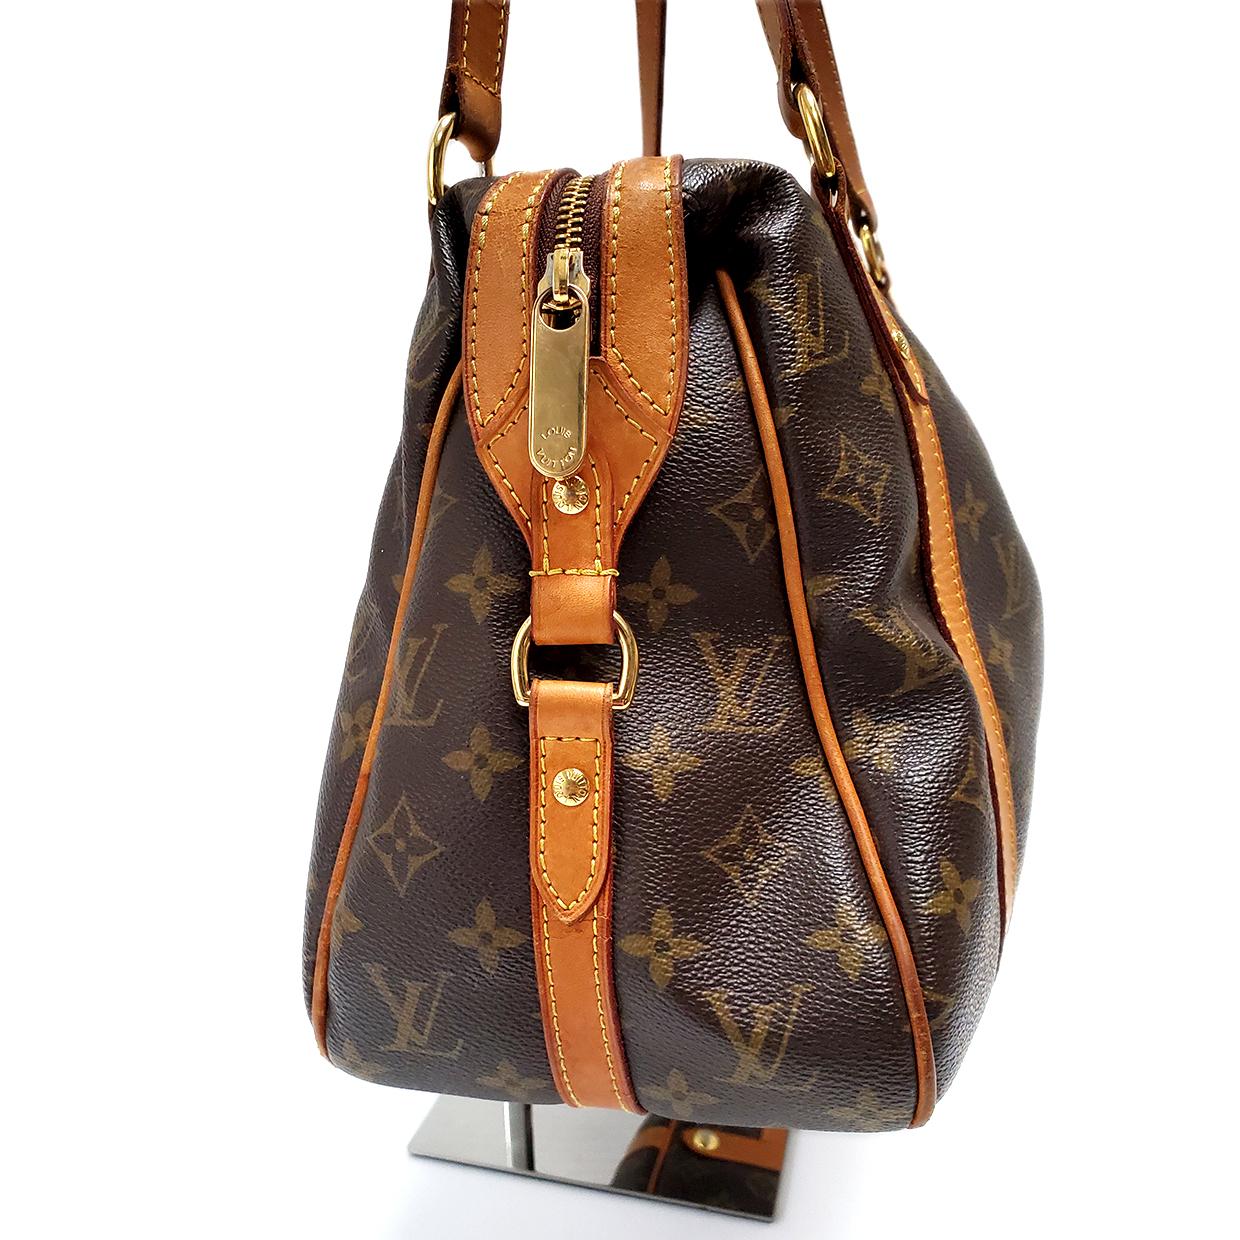 Brand - Louis Vuitton
Collection - Stresa PM
Estimated Retail - $1,980.00
Style - Hand Bag
Material - Canvas
Color - Brown
Pattern - Monogram
Closure - Zip
Hardware Material - Goldtone
Model/Date Code - SD0120
Size - Medium
Feature - Inner